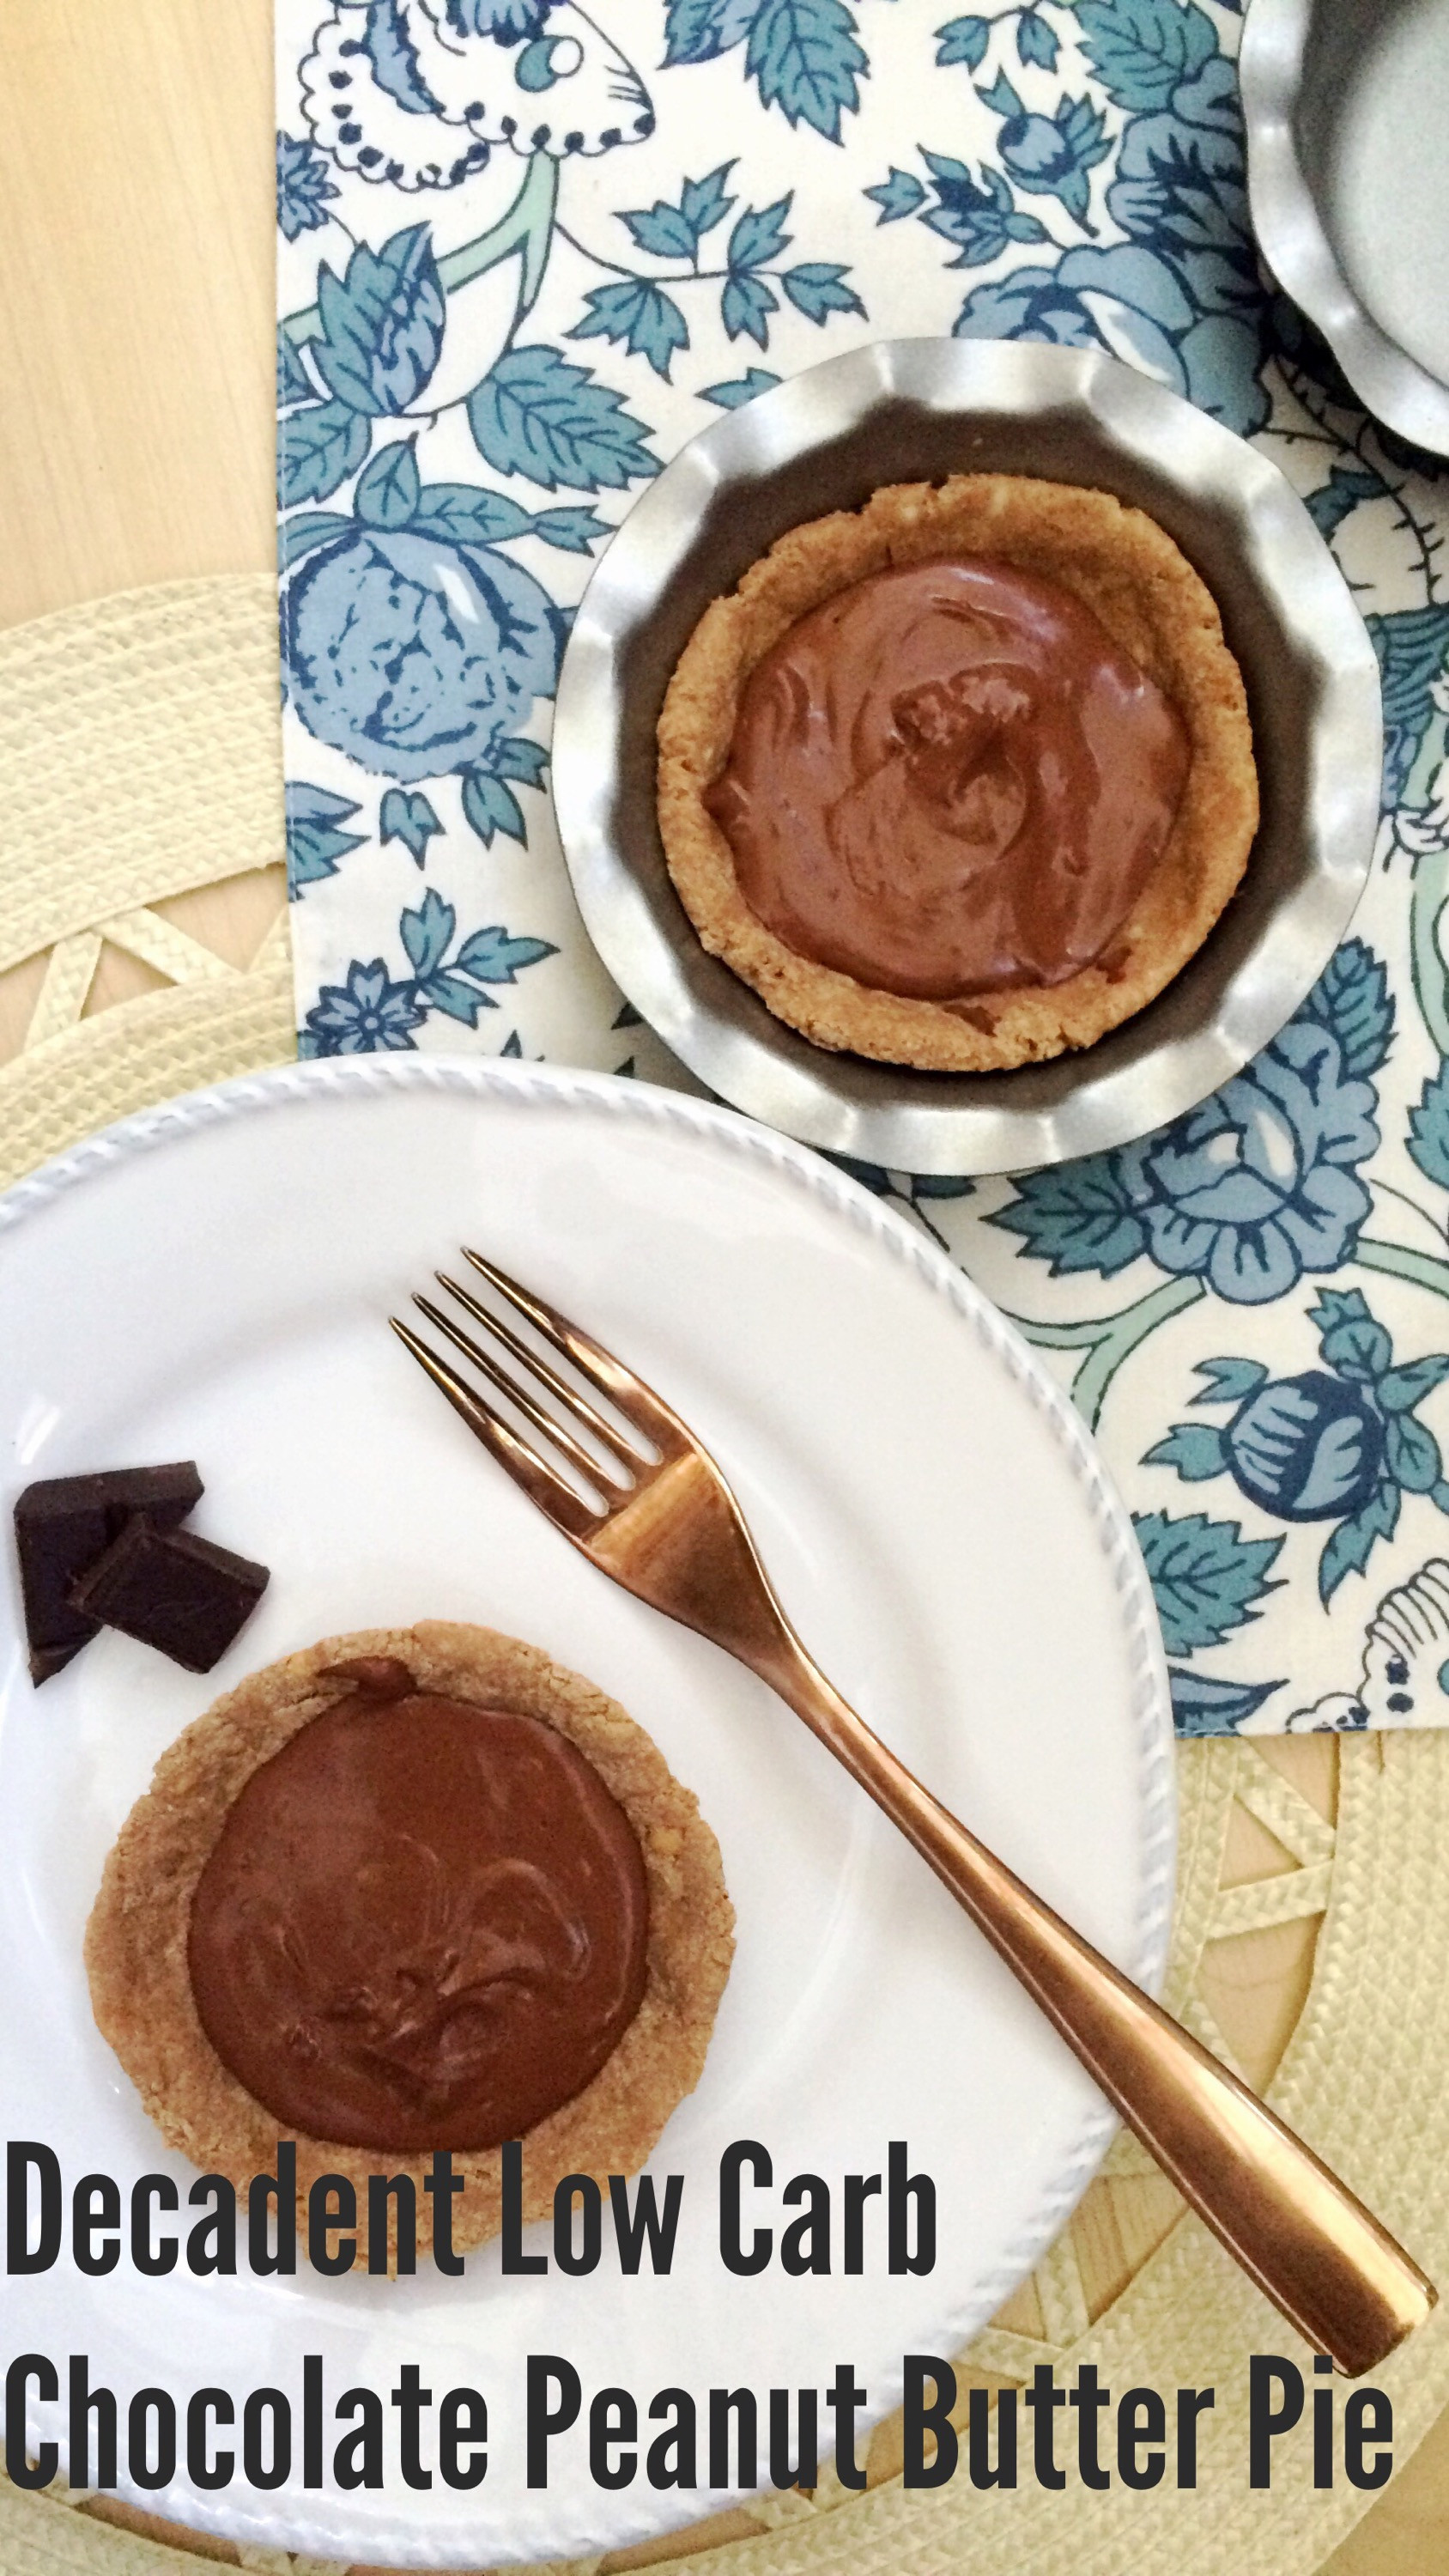 Keto Peanut Butter Pie
 Decadent low carb Chocolate Peanut Butter Pie perfect